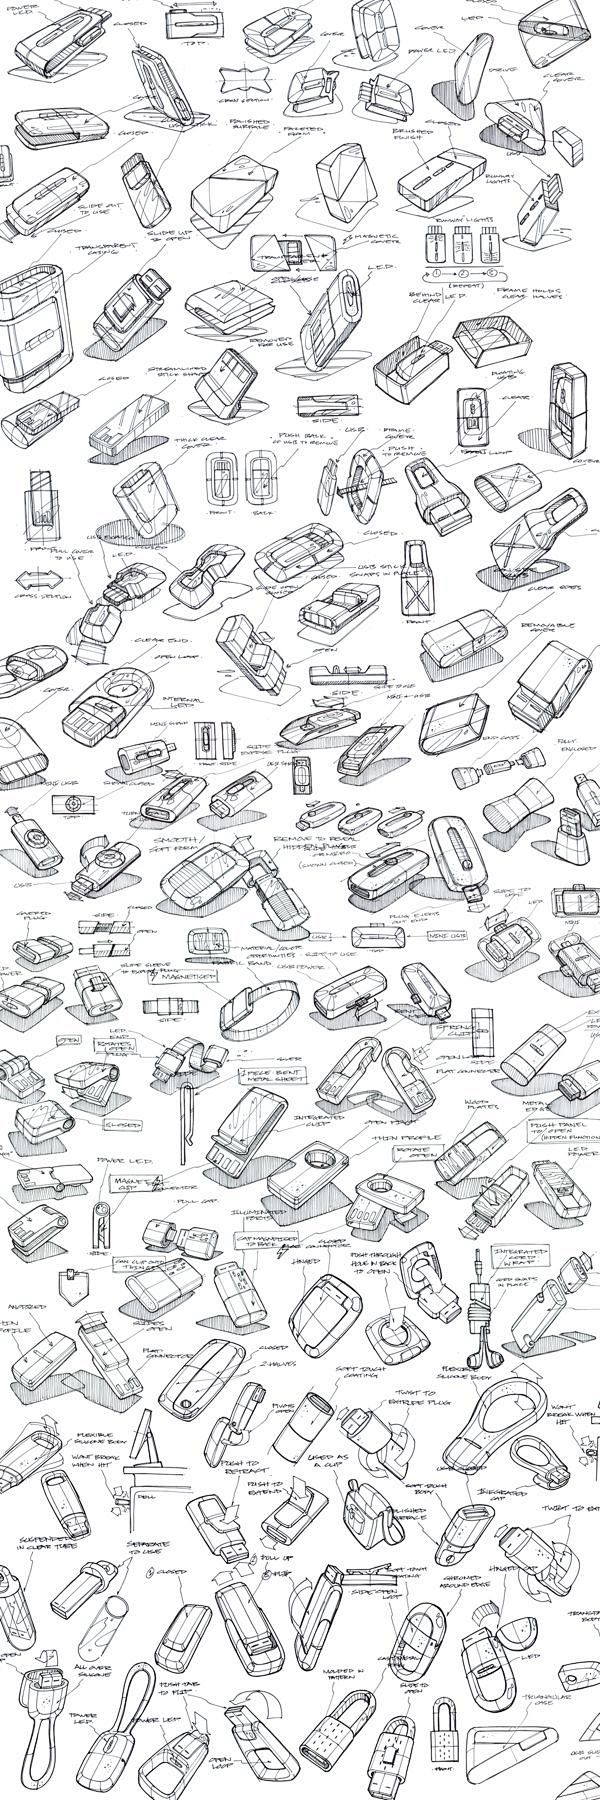 Product Sketching & ...